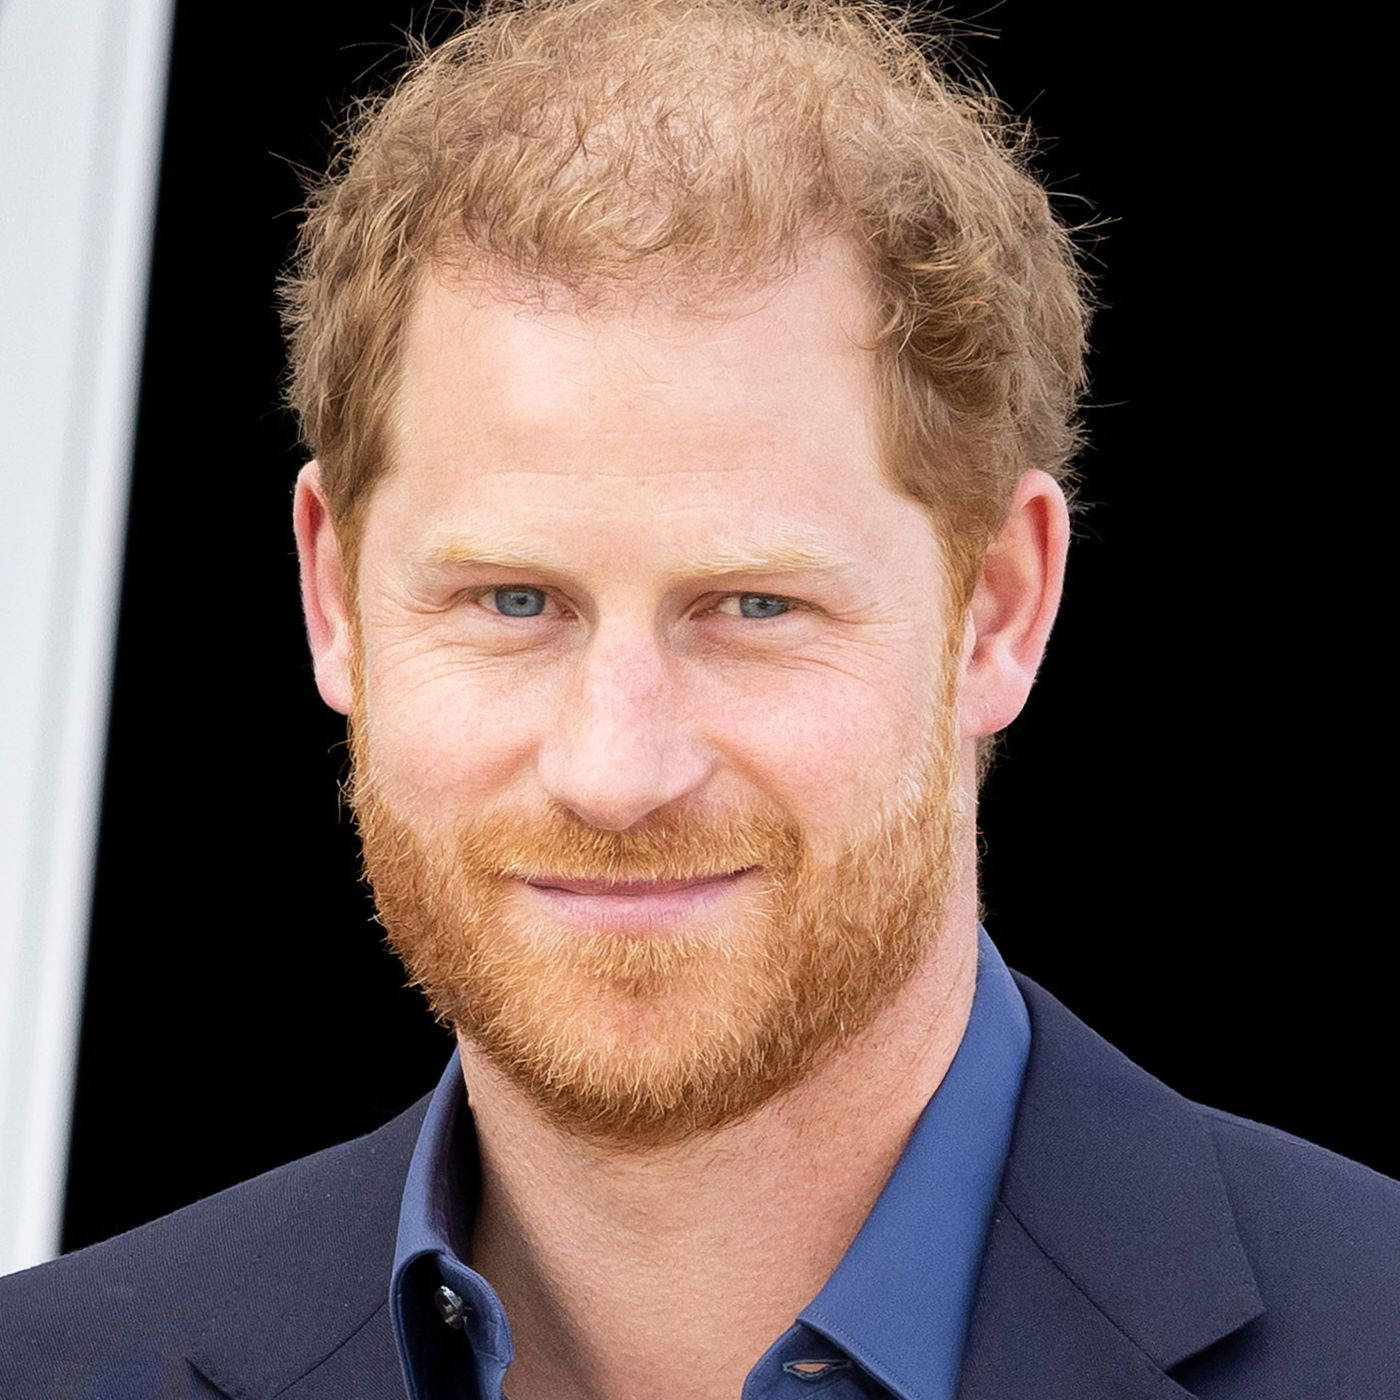 A Genuine and Heartwarming Smile from Prince Harry Wallpaper